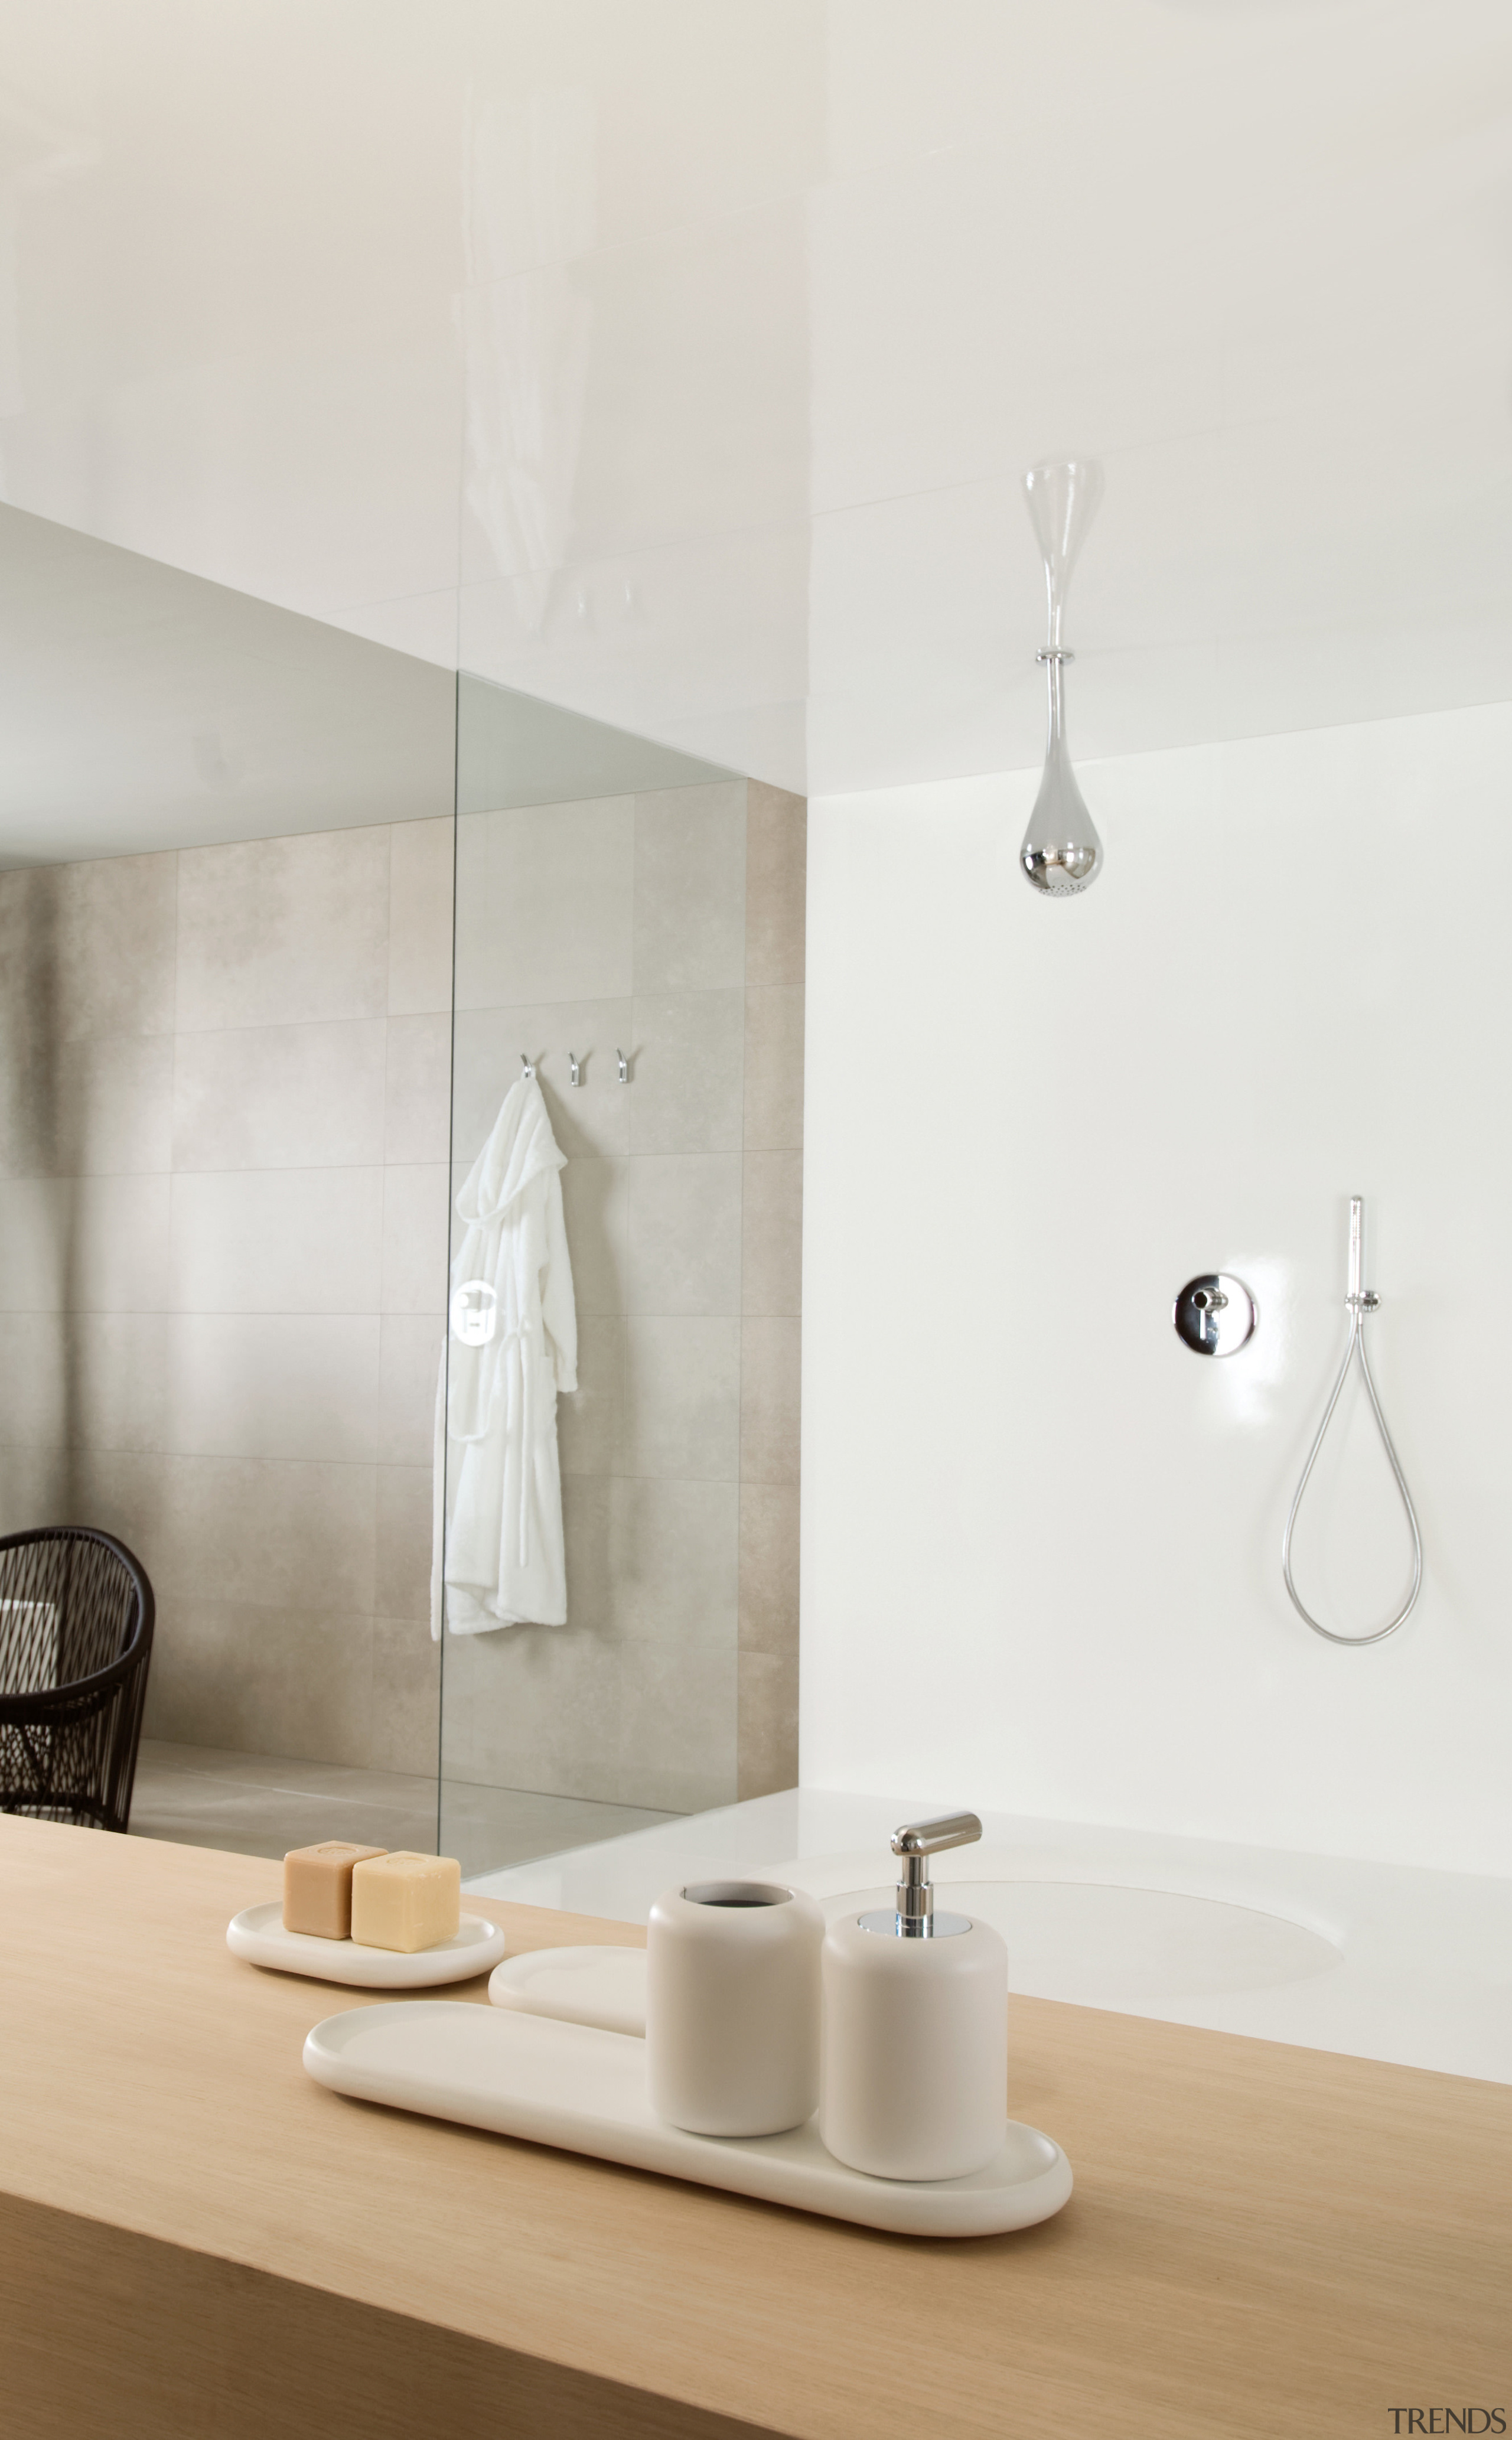 Transitional Gessi bathroomware - Transitional Gessi bathroomware - bathroom, bathroom sink, ceramic, floor, interior design, light fixture, plumbing fixture, product design, sink, tap, wall, white